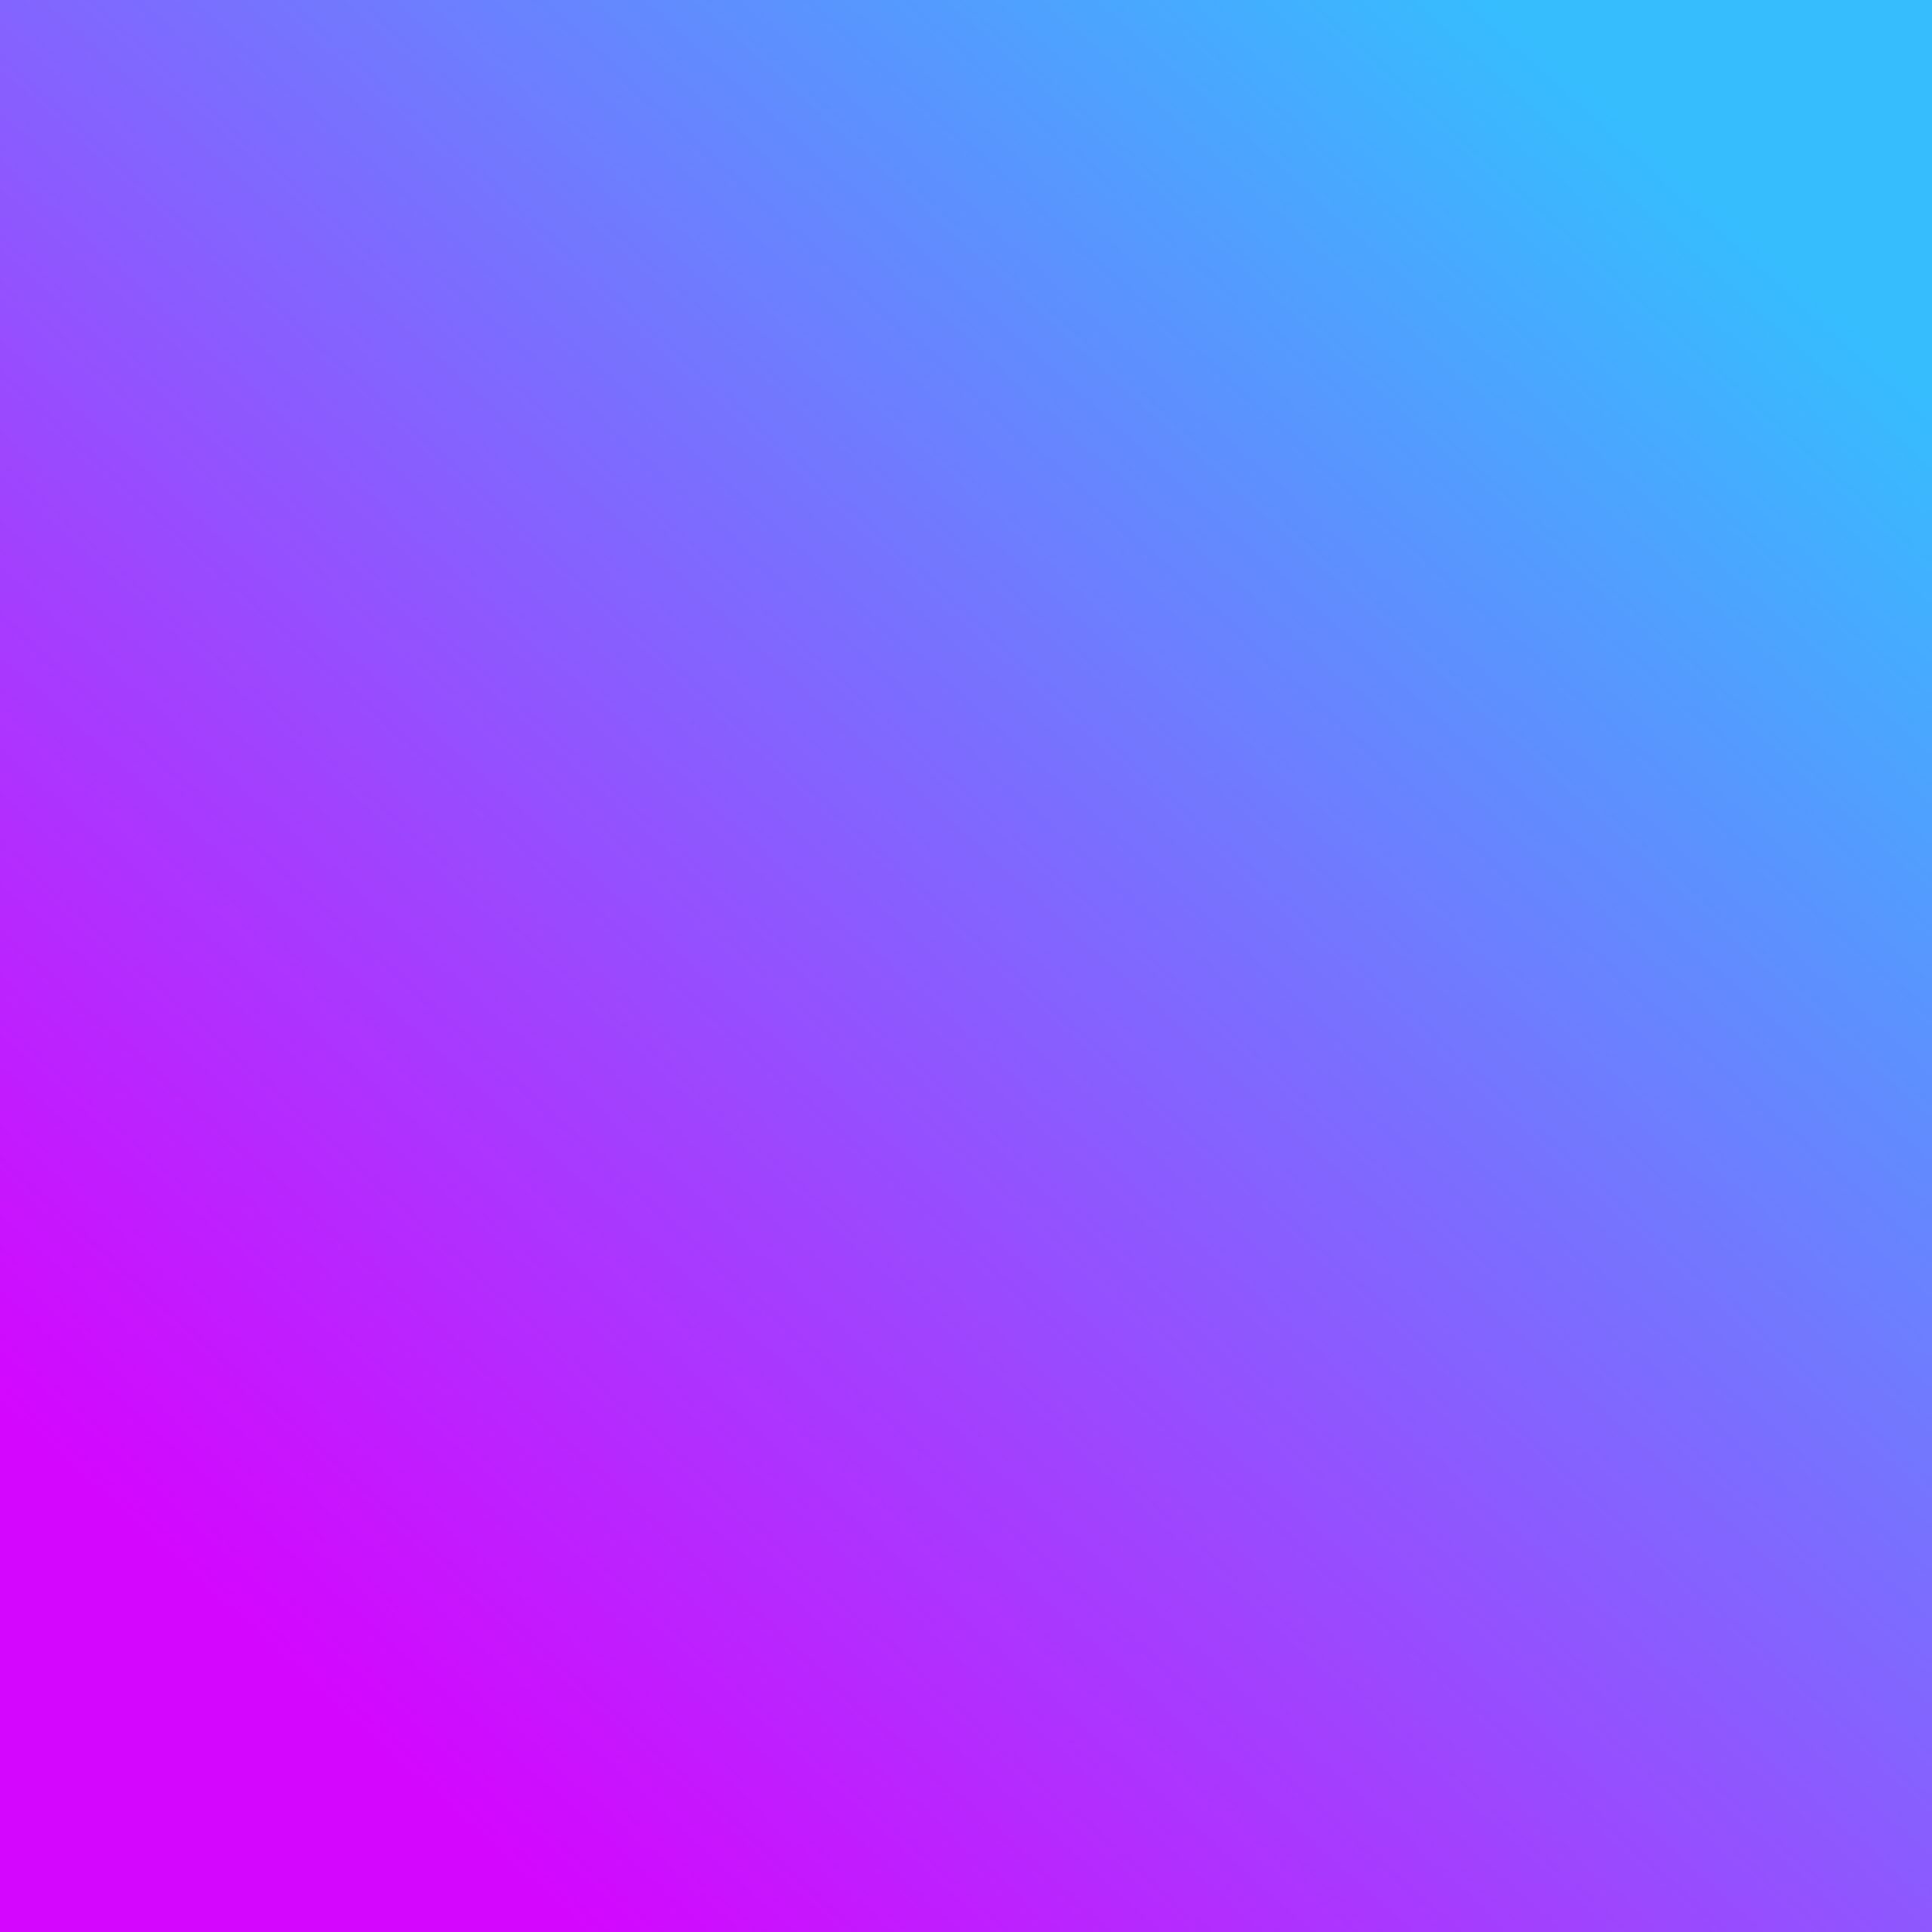 Bright gradient wallpaper for iPhone, iPad and computer - Geek Tech Online